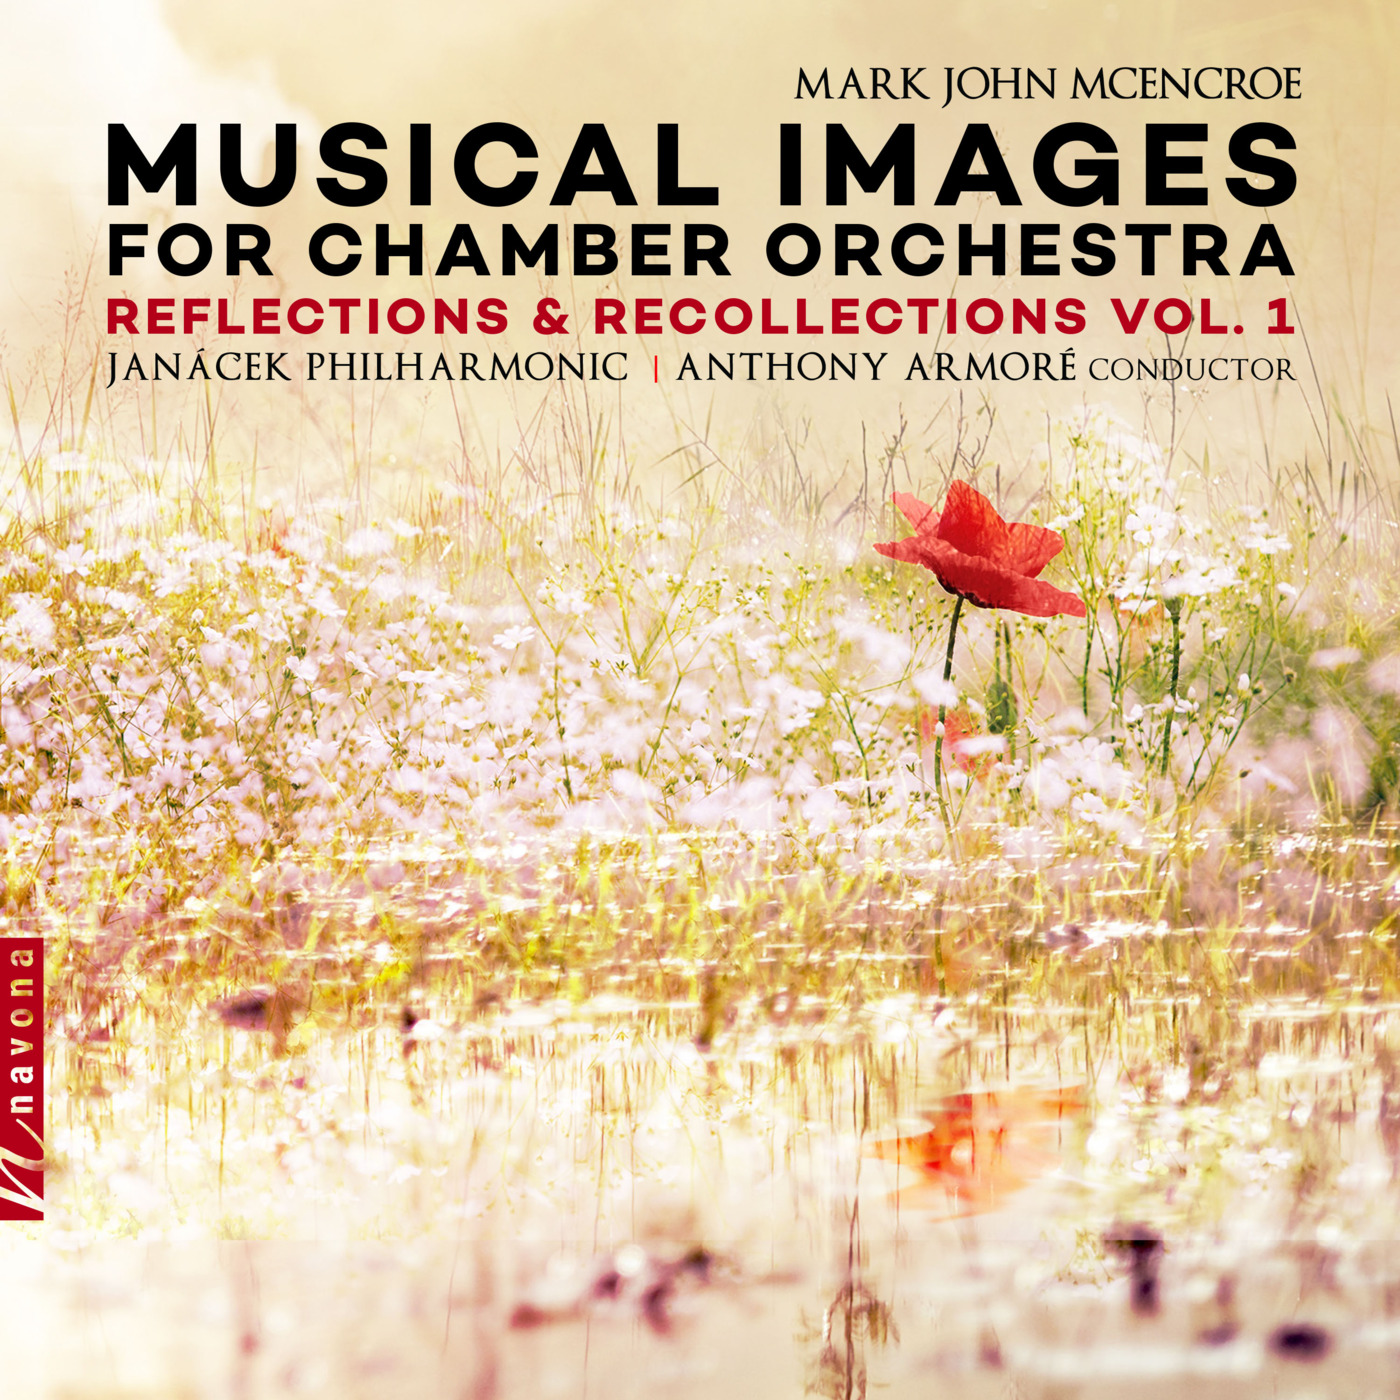 Episode 1: 16001 MUSICAL IMAGES FOR CHAMBER ORCHESTRA, Vol. 1